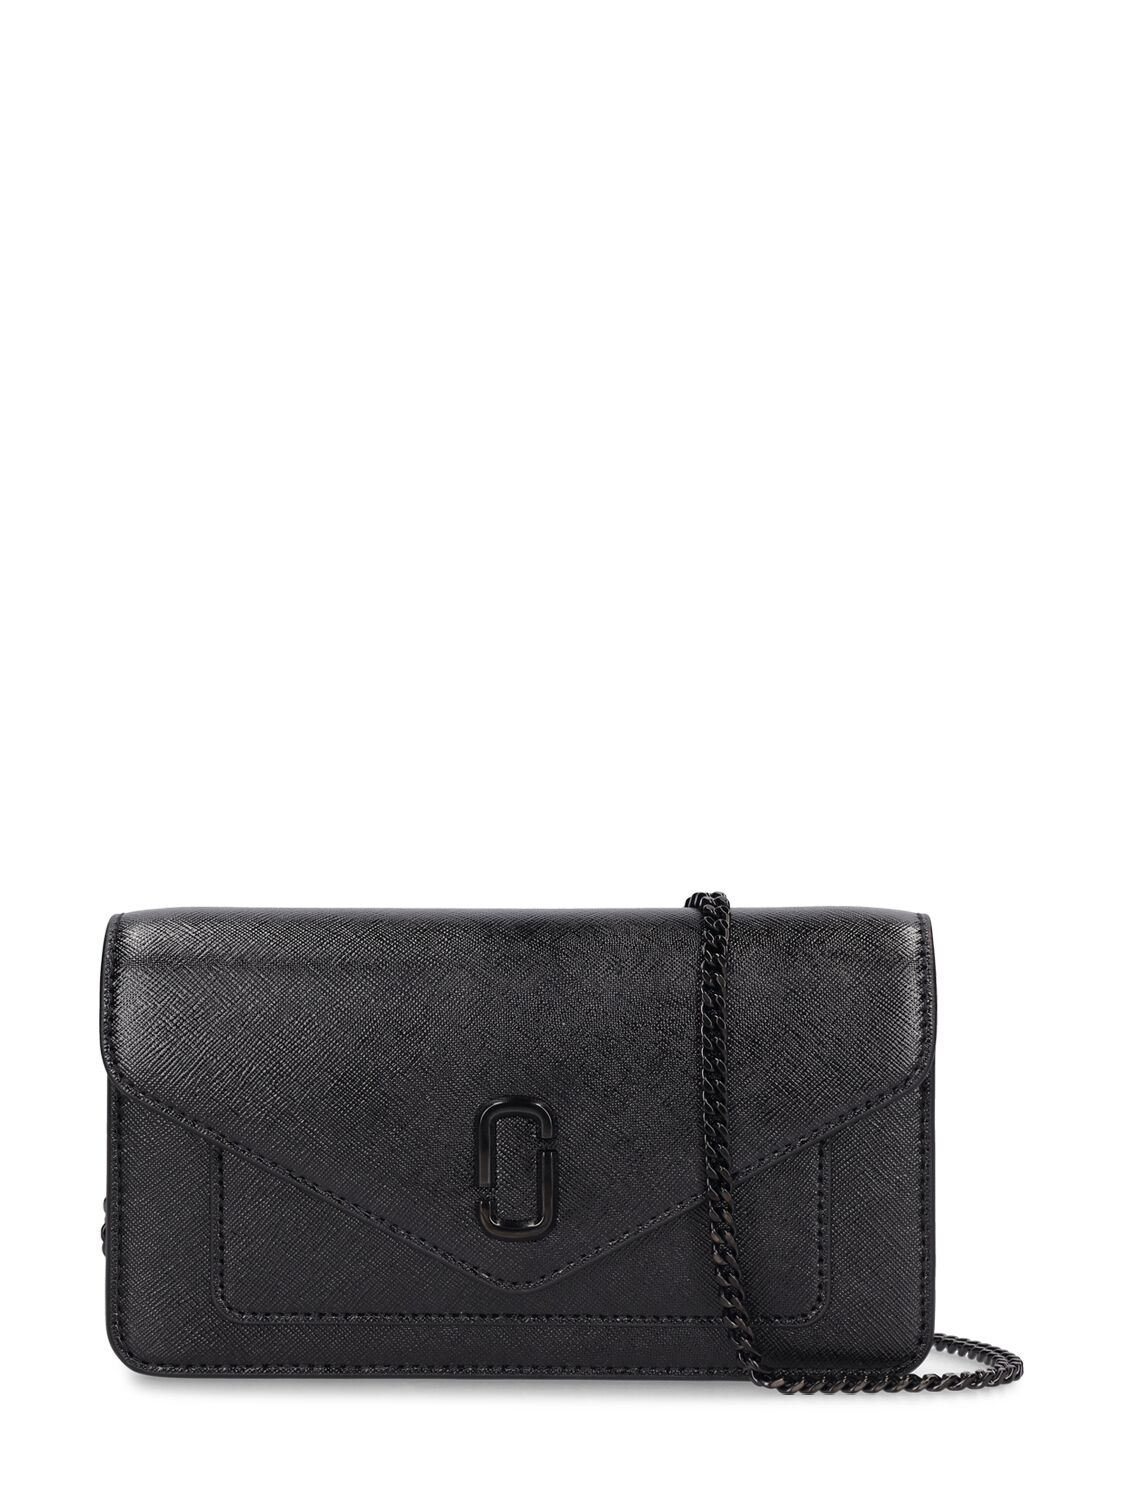 Marc Jacobs The Leather Envelope Chain Wallet In Black